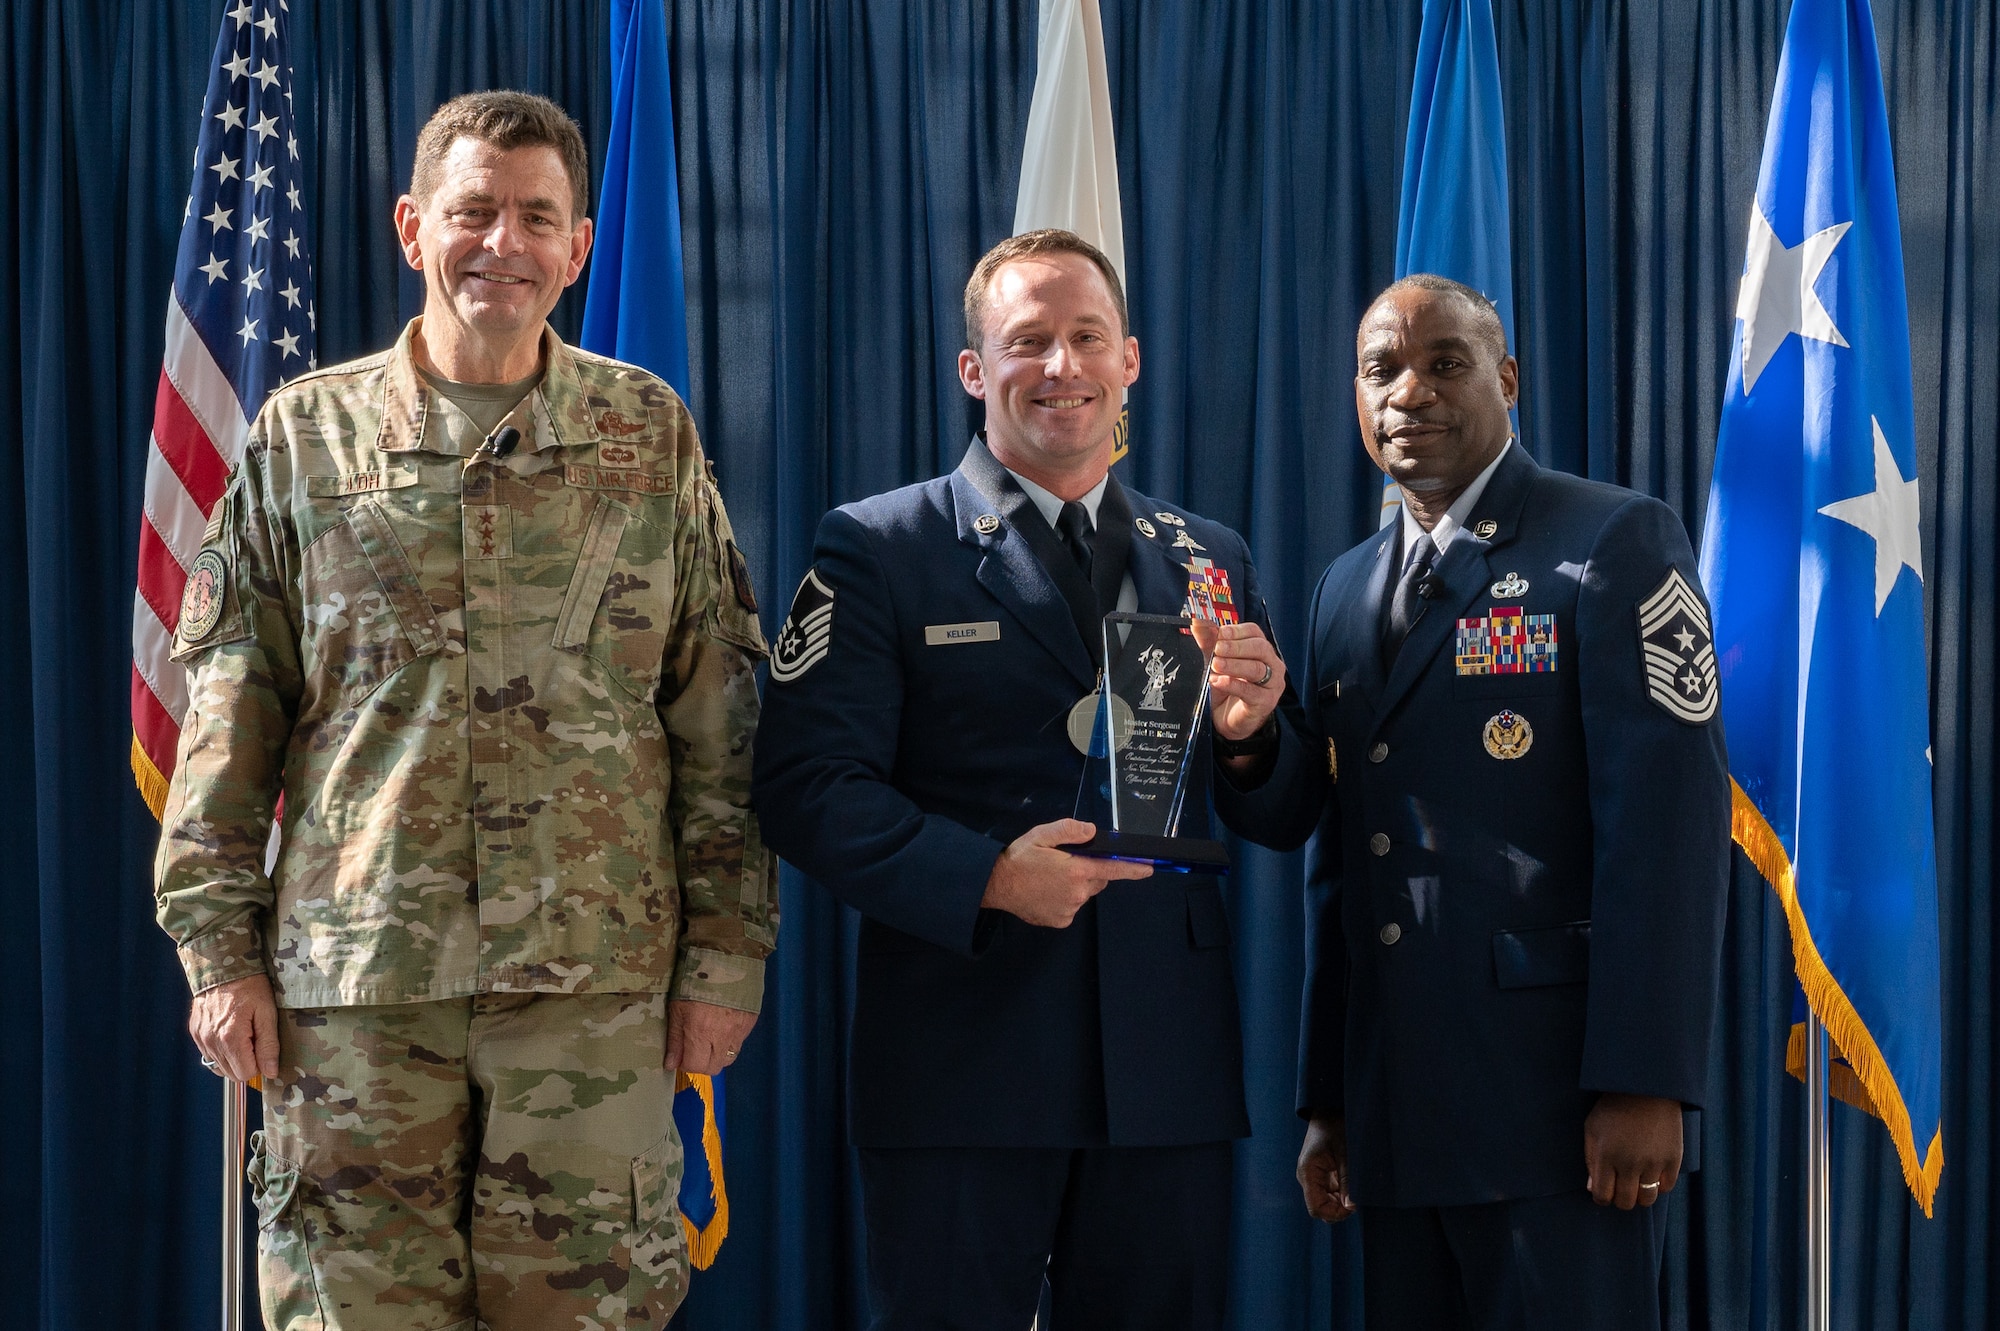 U.S. Air Force Master Sgt. Daniel P. Keller, of the 124th Fighter Wing, Idaho National Guard, poses for a photo with Lt. Gen. Michael A. Loh, left, director, Air National Guard (ANG), and Chief Master Sgt. Maurice L. Williams, right, command chief, ANG, during the Outstanding Airmen of the Year ceremony at Joint Base Andrews, Maryland, on Aug. 25, 2022.